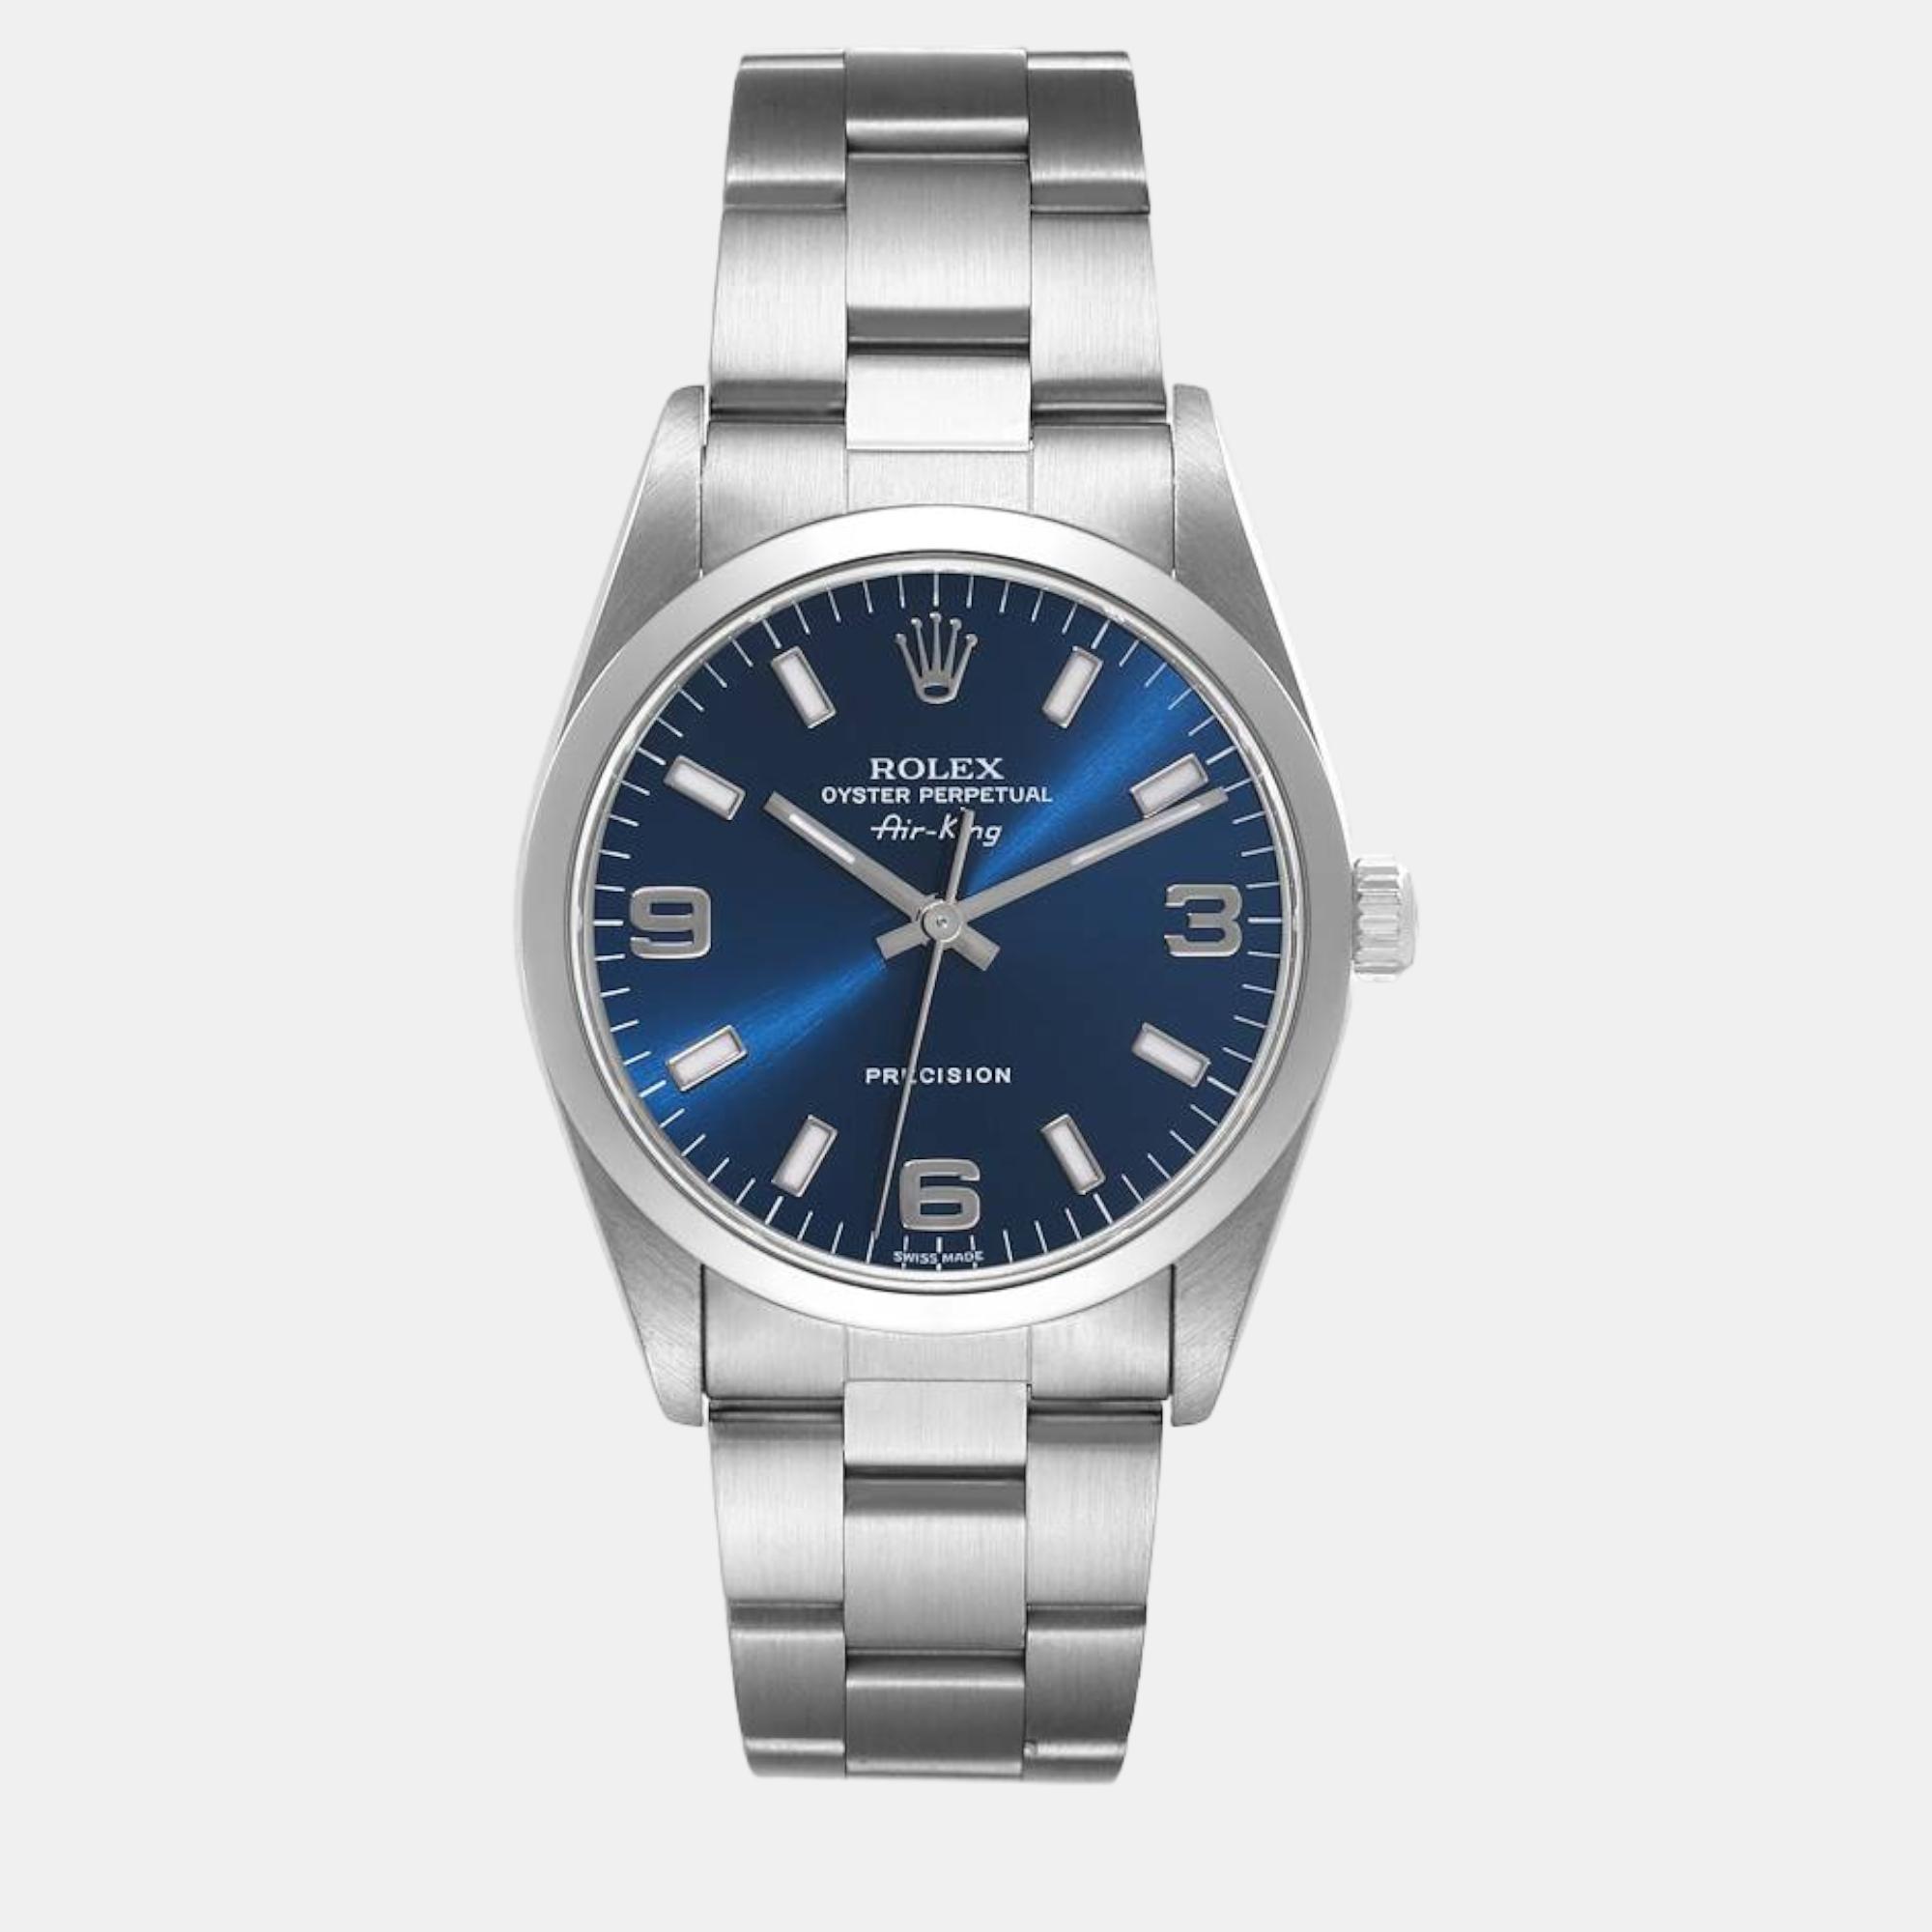 A classy silhouette made of high quality materials and packed with precision and luxury makes this authentic Rolex wristwatch the perfect choice for a sophisticated finish to any look. It is a grand creation to elevate the everyday experience.